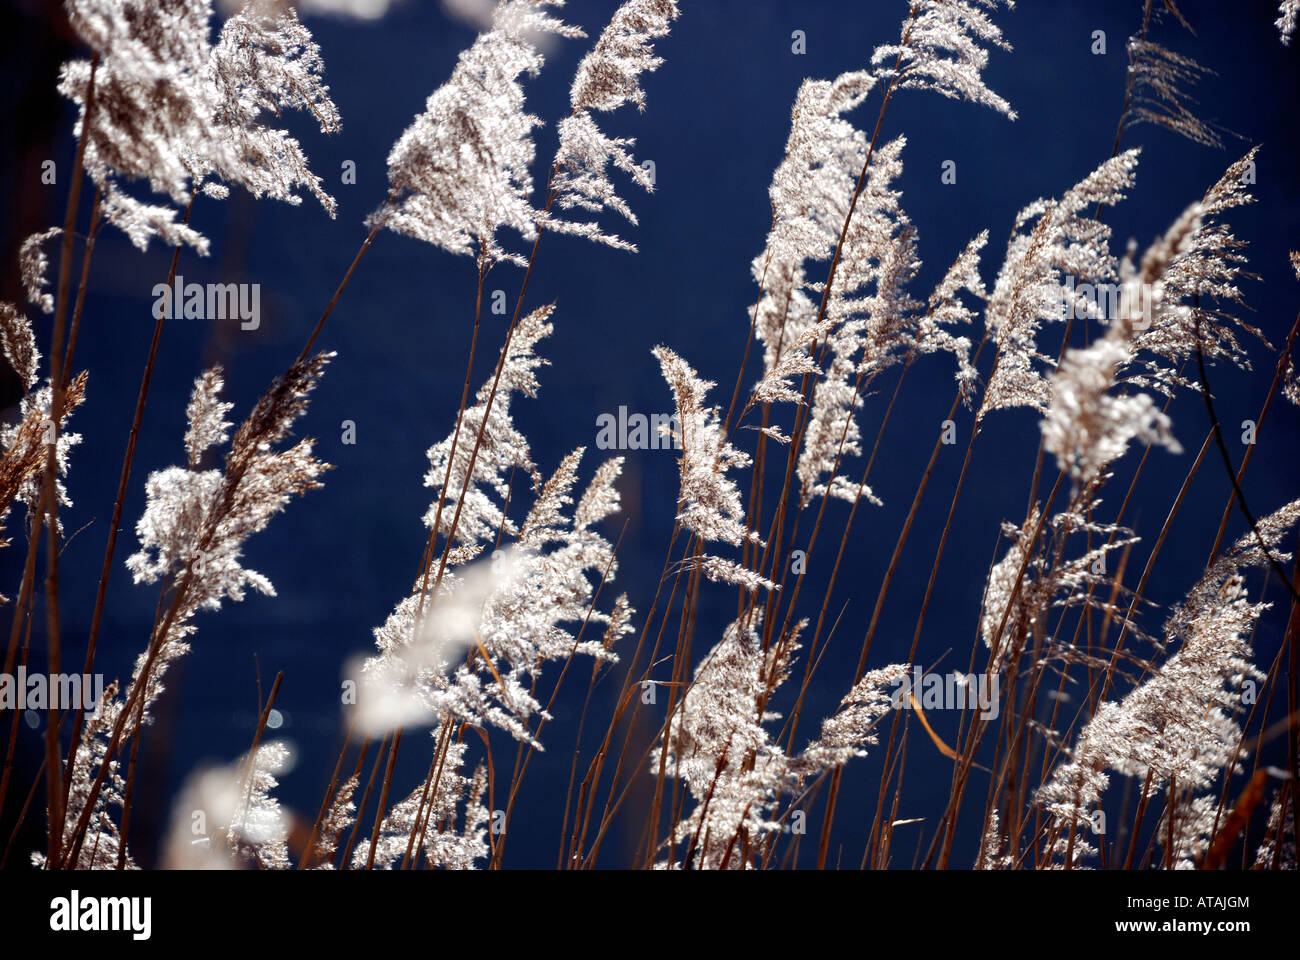 reed plants swaying in the wind backlight outside outdoors deep blue sky Stock Photo